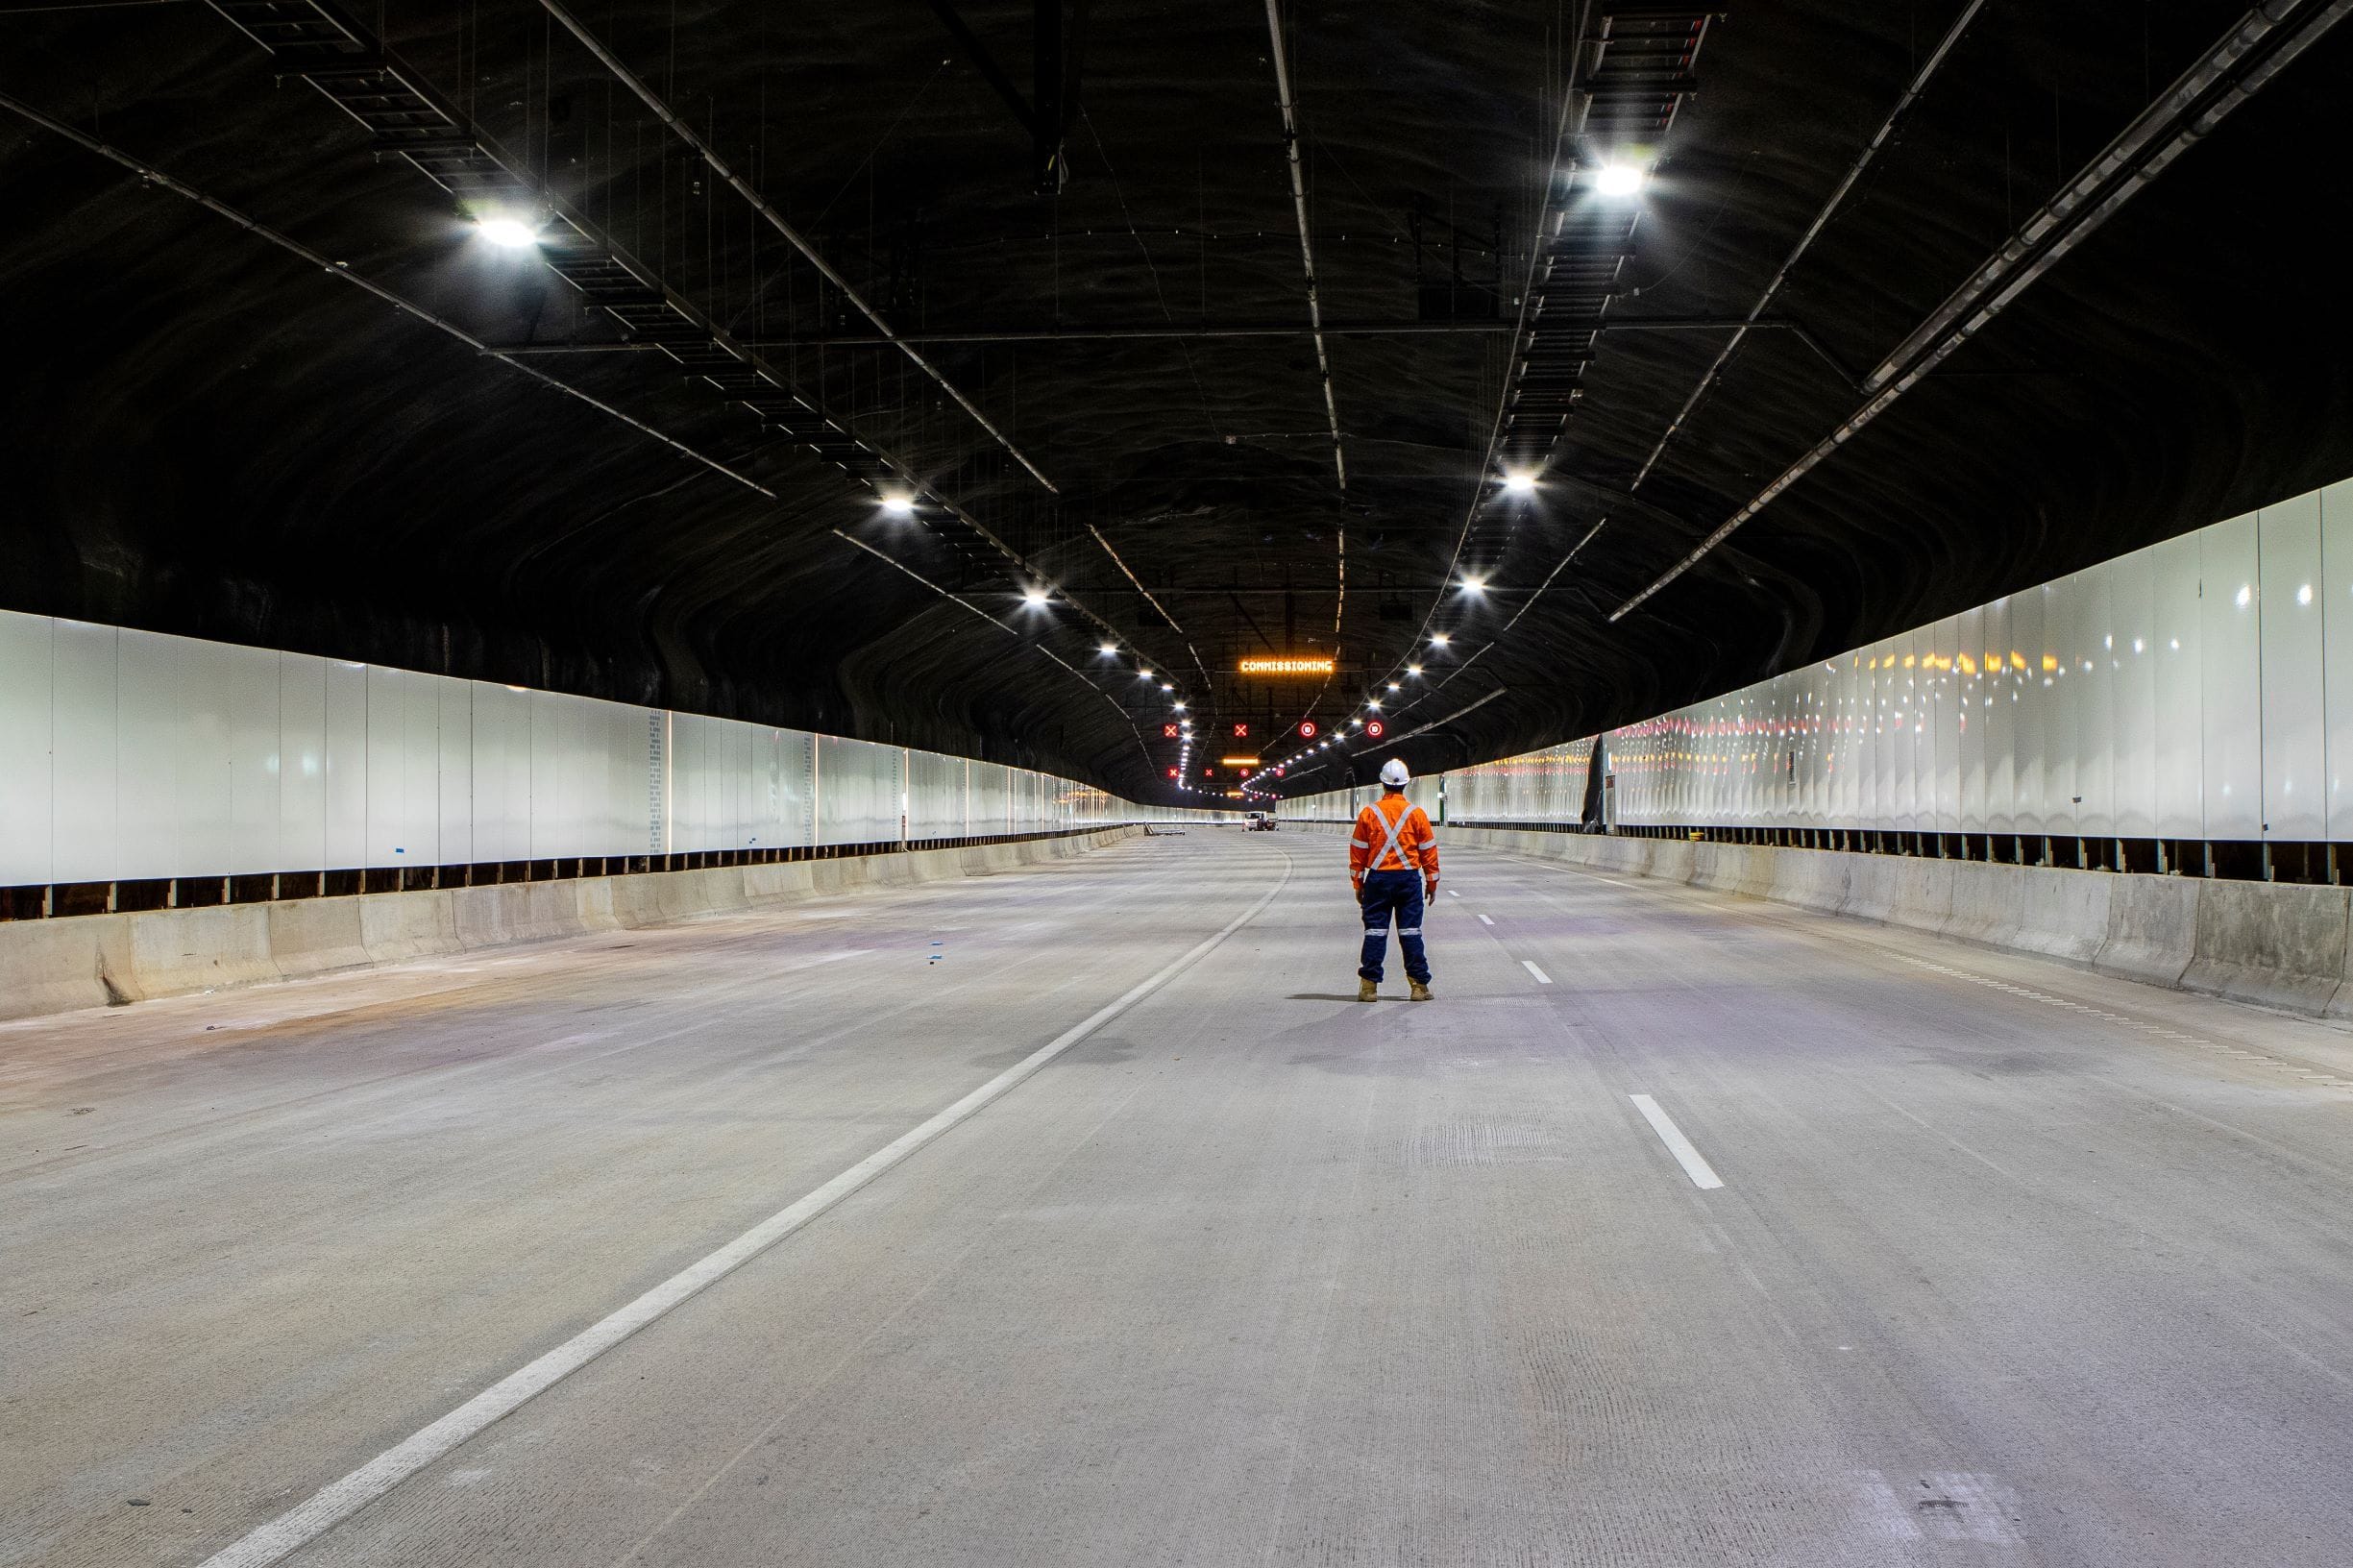 Transurban to acquire WestConnex from NSW Government for $11.1 billion